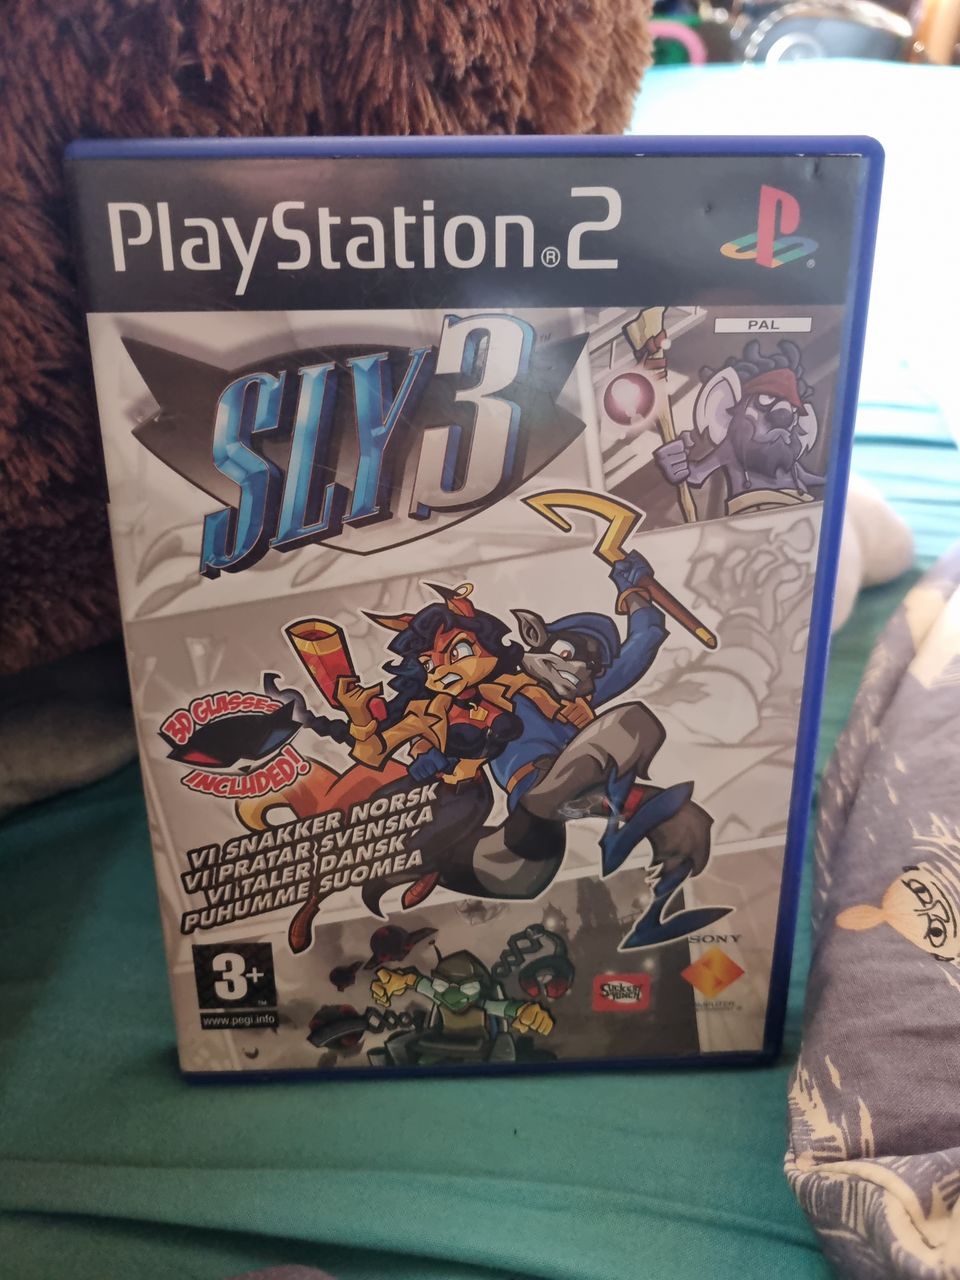 Sly 3 ps2